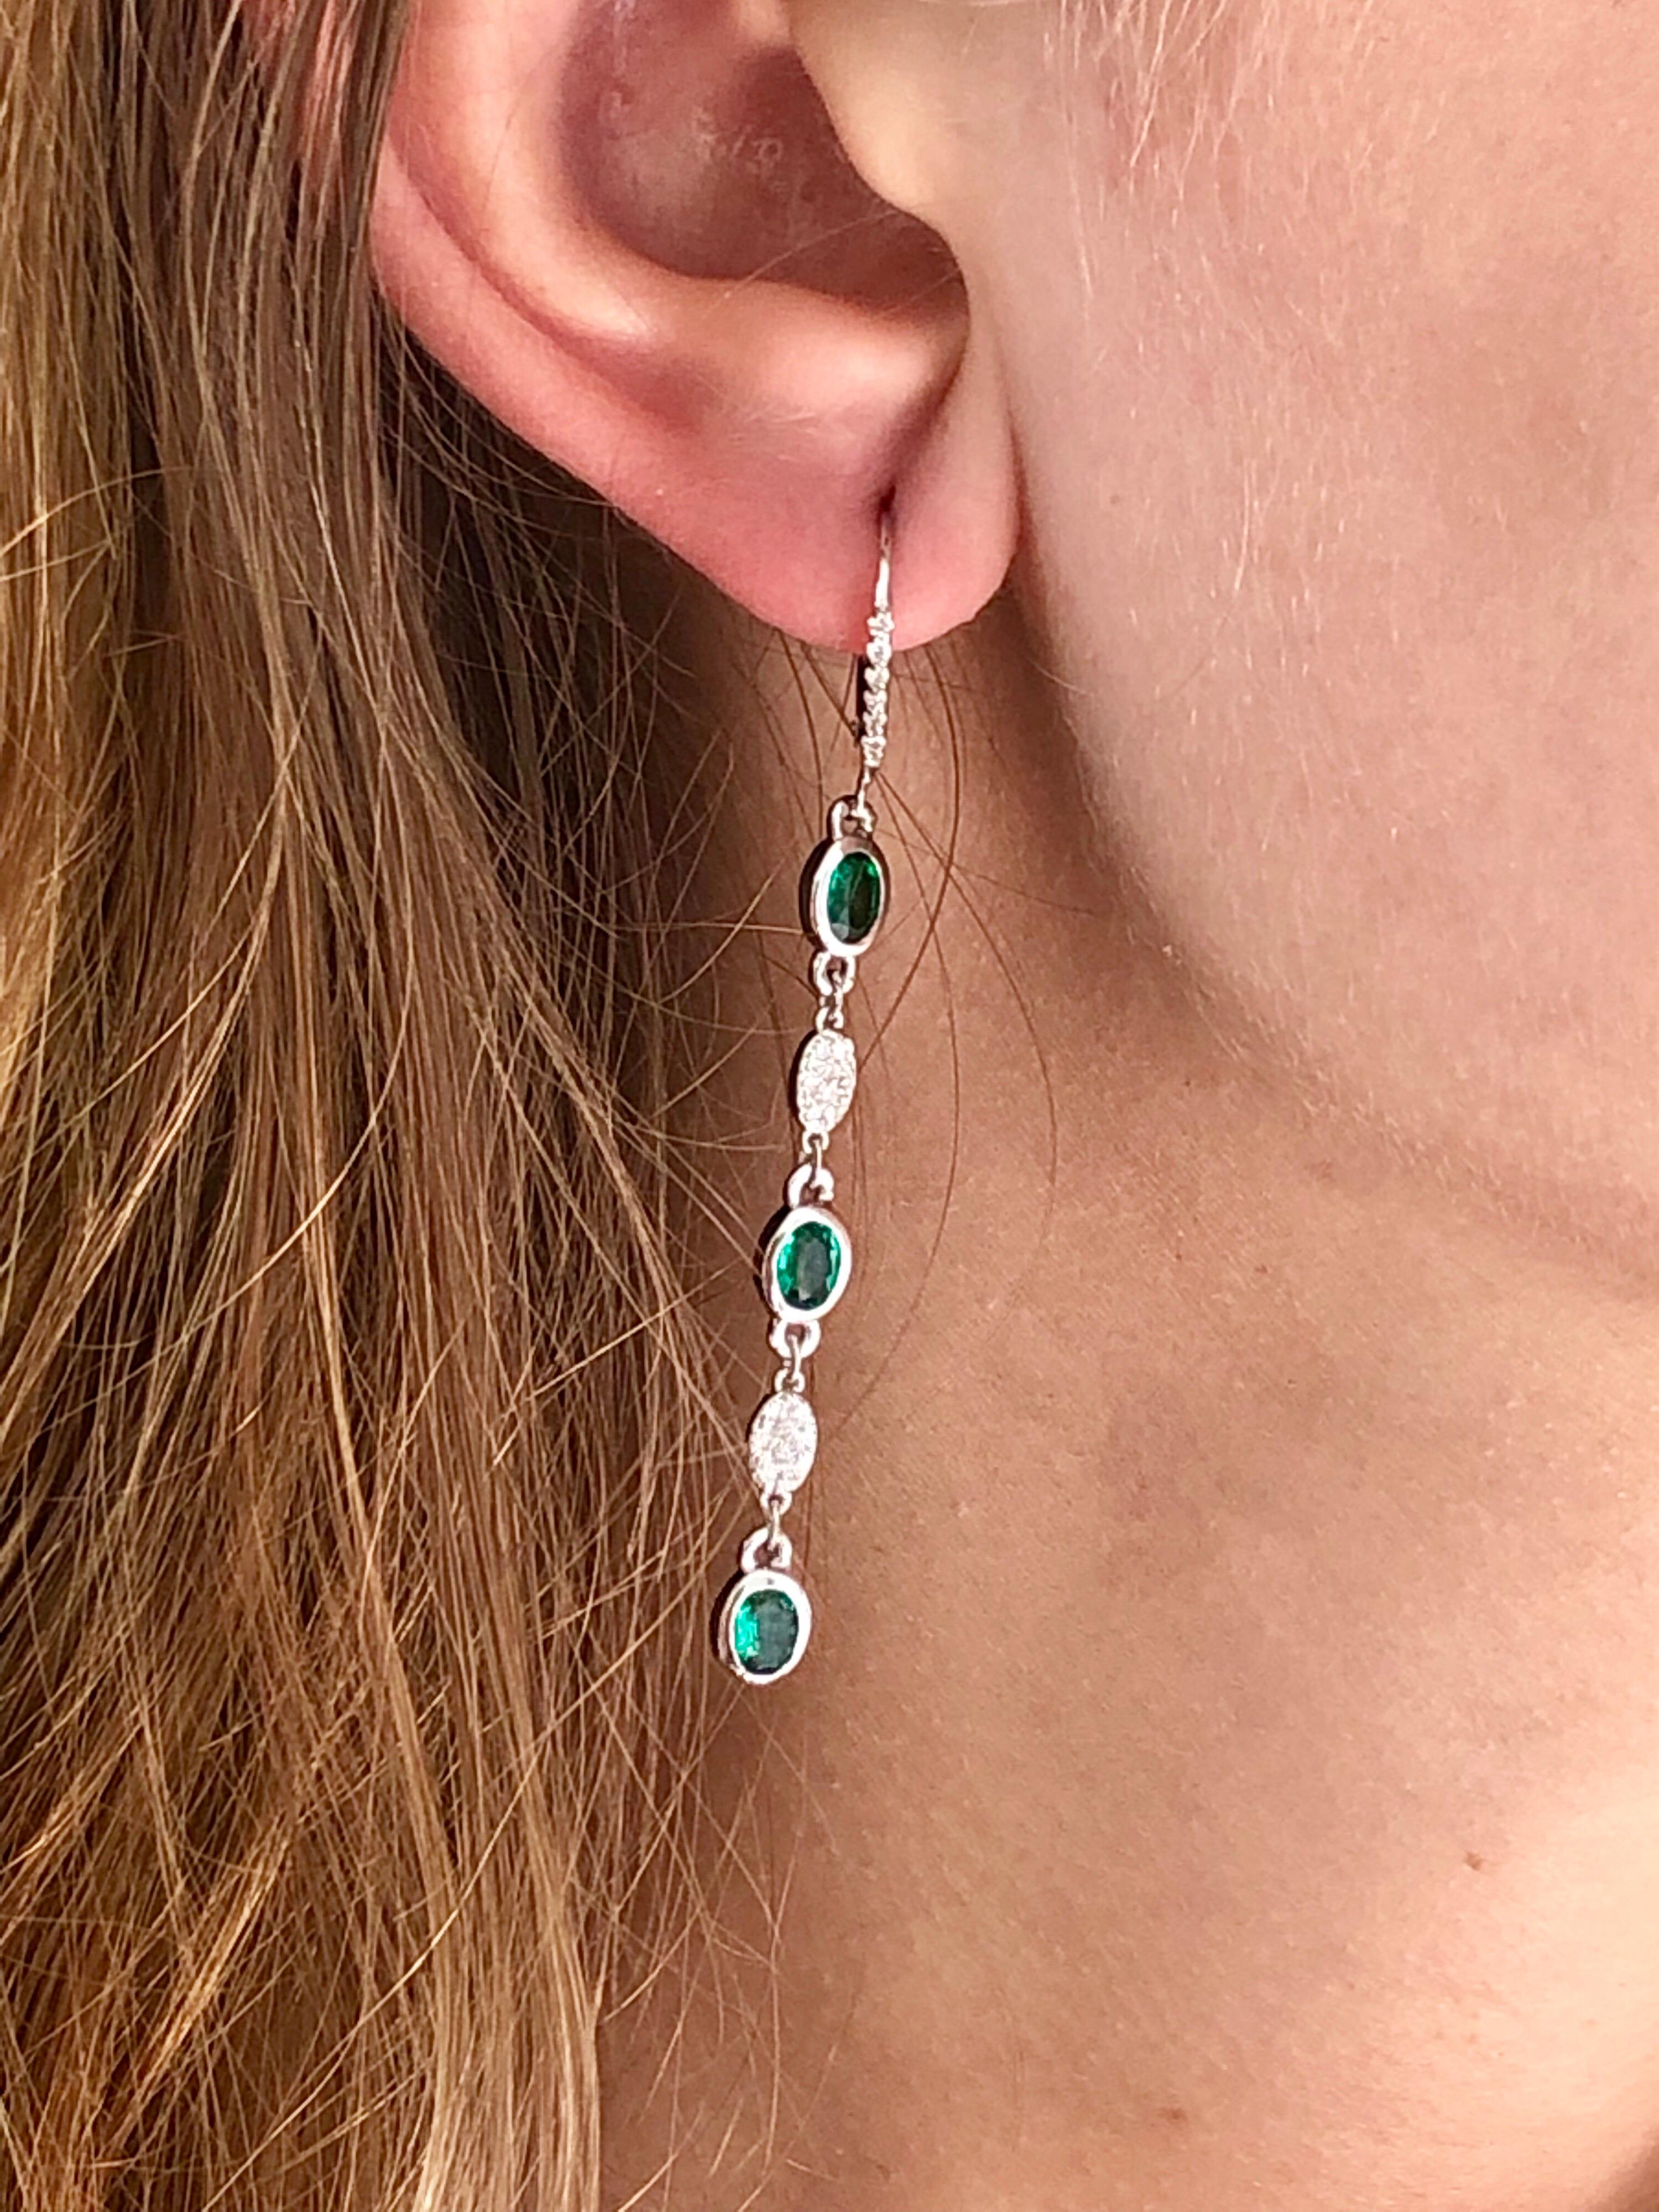 Fourteen karat white gold hoop two inch long drop earrings 
Diamond weighing 0.65 carat
Emeralds weighing 1.75 carat 
One of a kind earrings
Bright, almost flawless and vivid green matched six emeralds
Each emerald weighs 0.30 carat
New